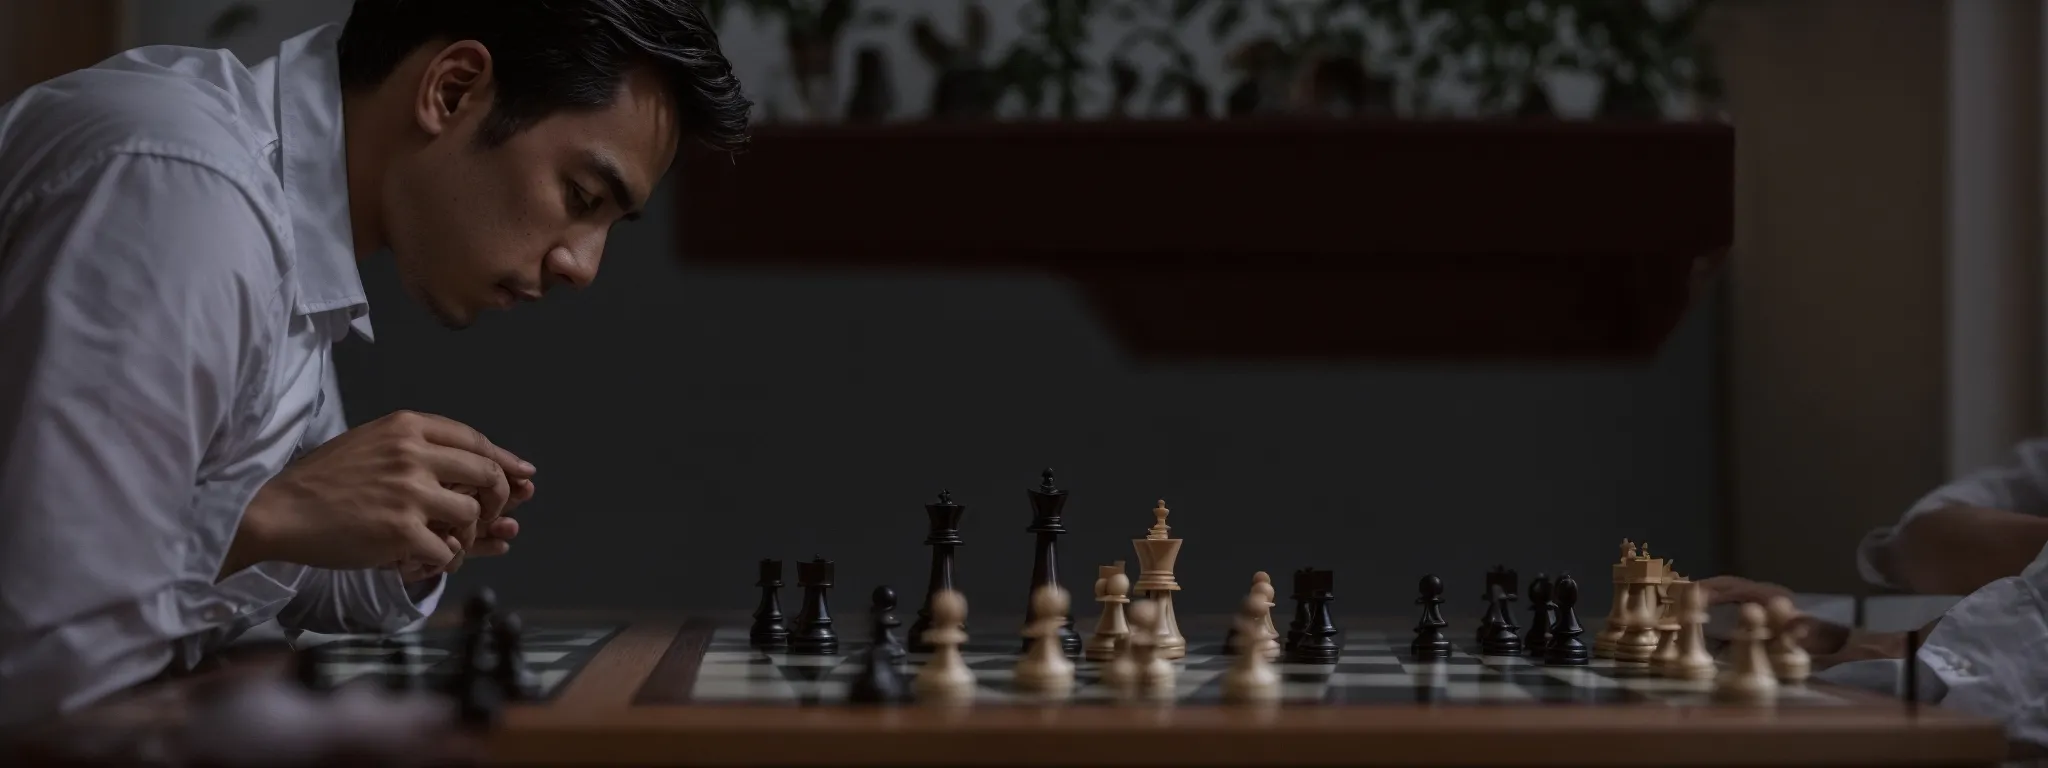 a chess player pondering a strategic move on a quiet, focused chessboard setup.